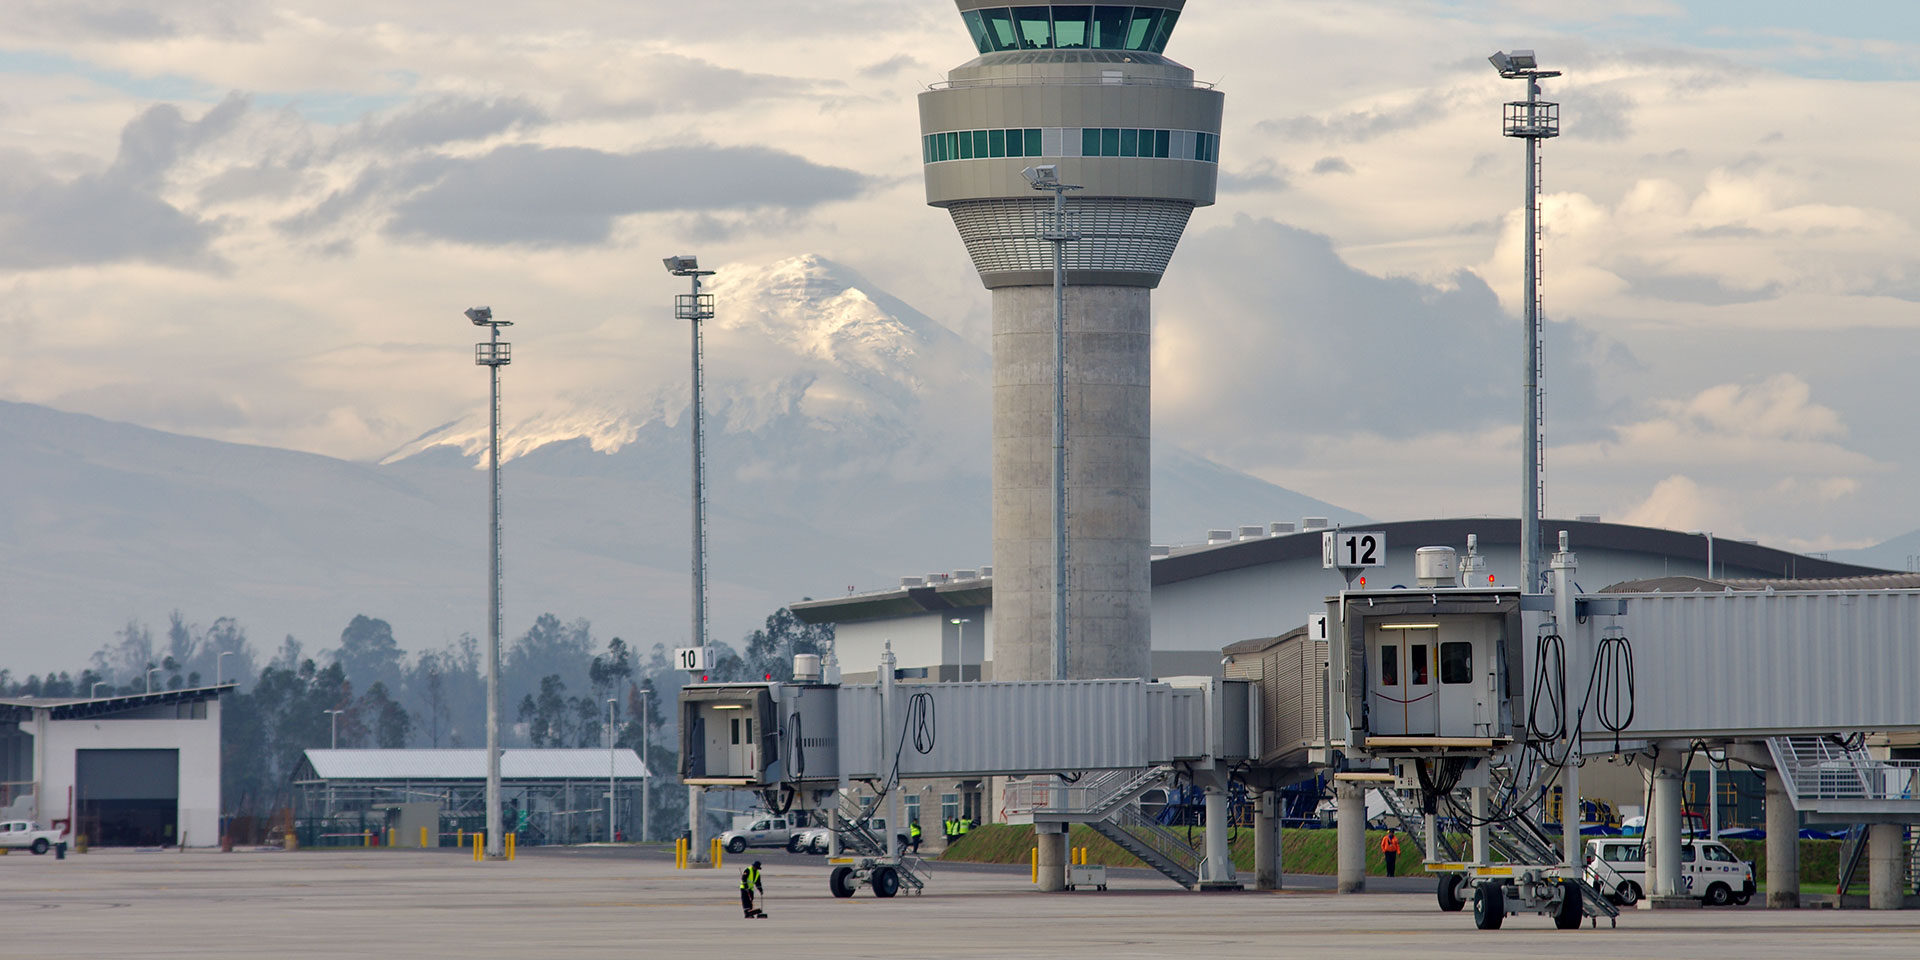 Quito Airport Tower